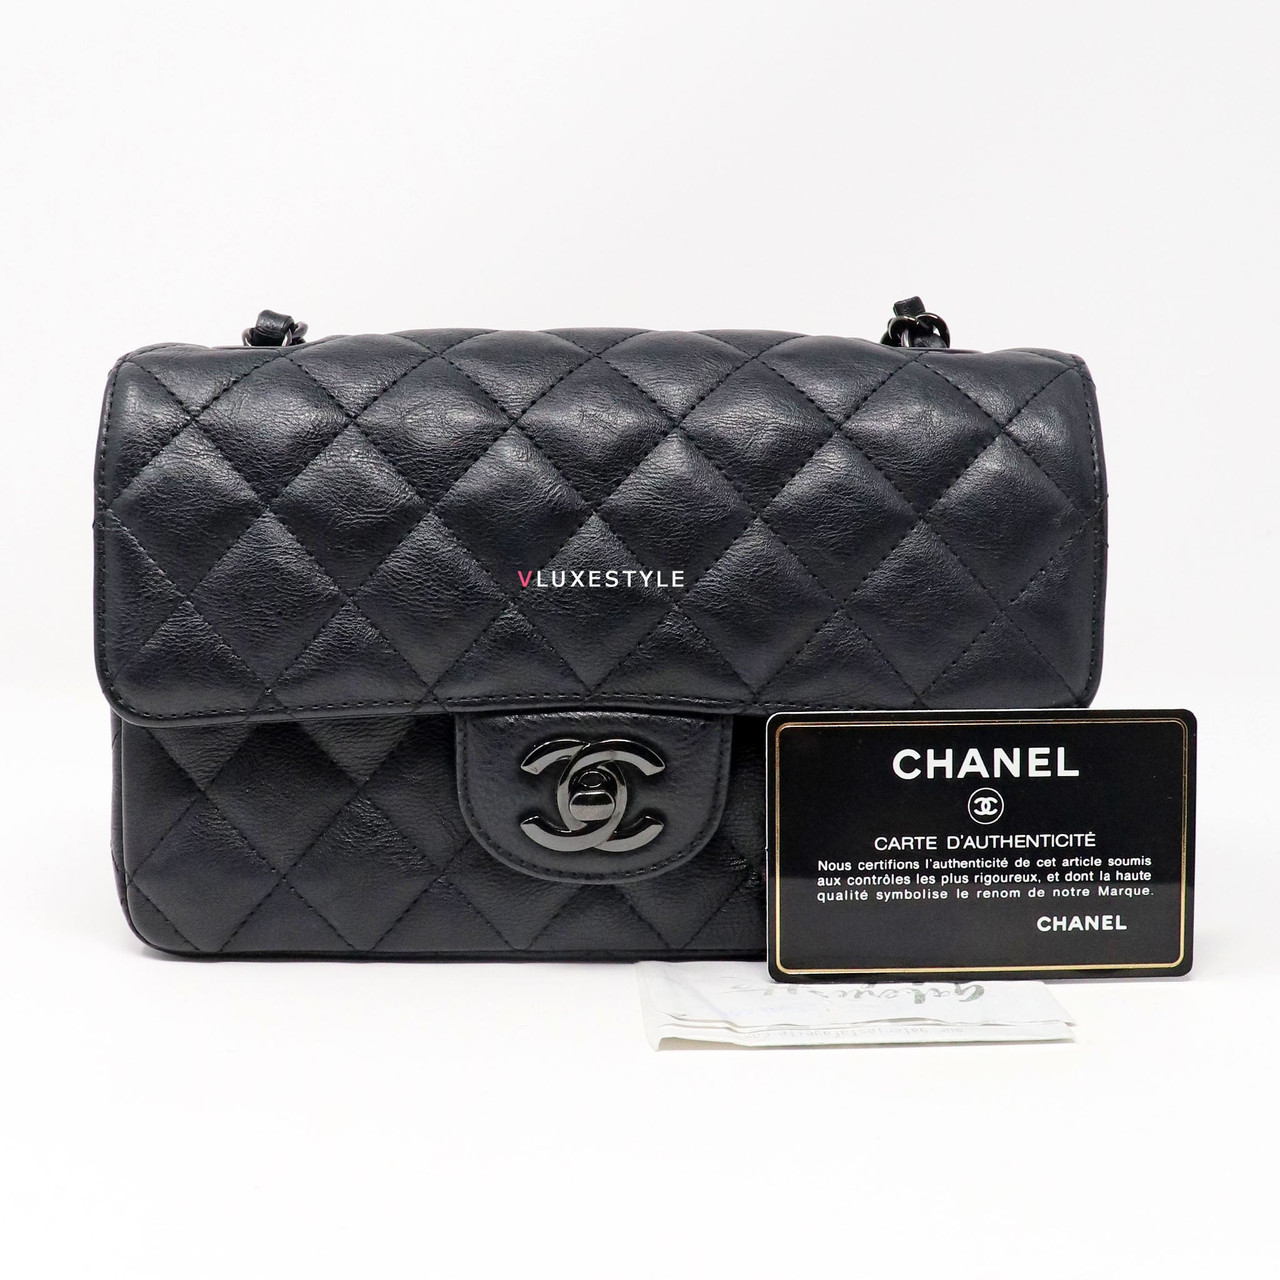 Chanel Chanel Butt Bag 2005 Limited Black Leather Hard Case